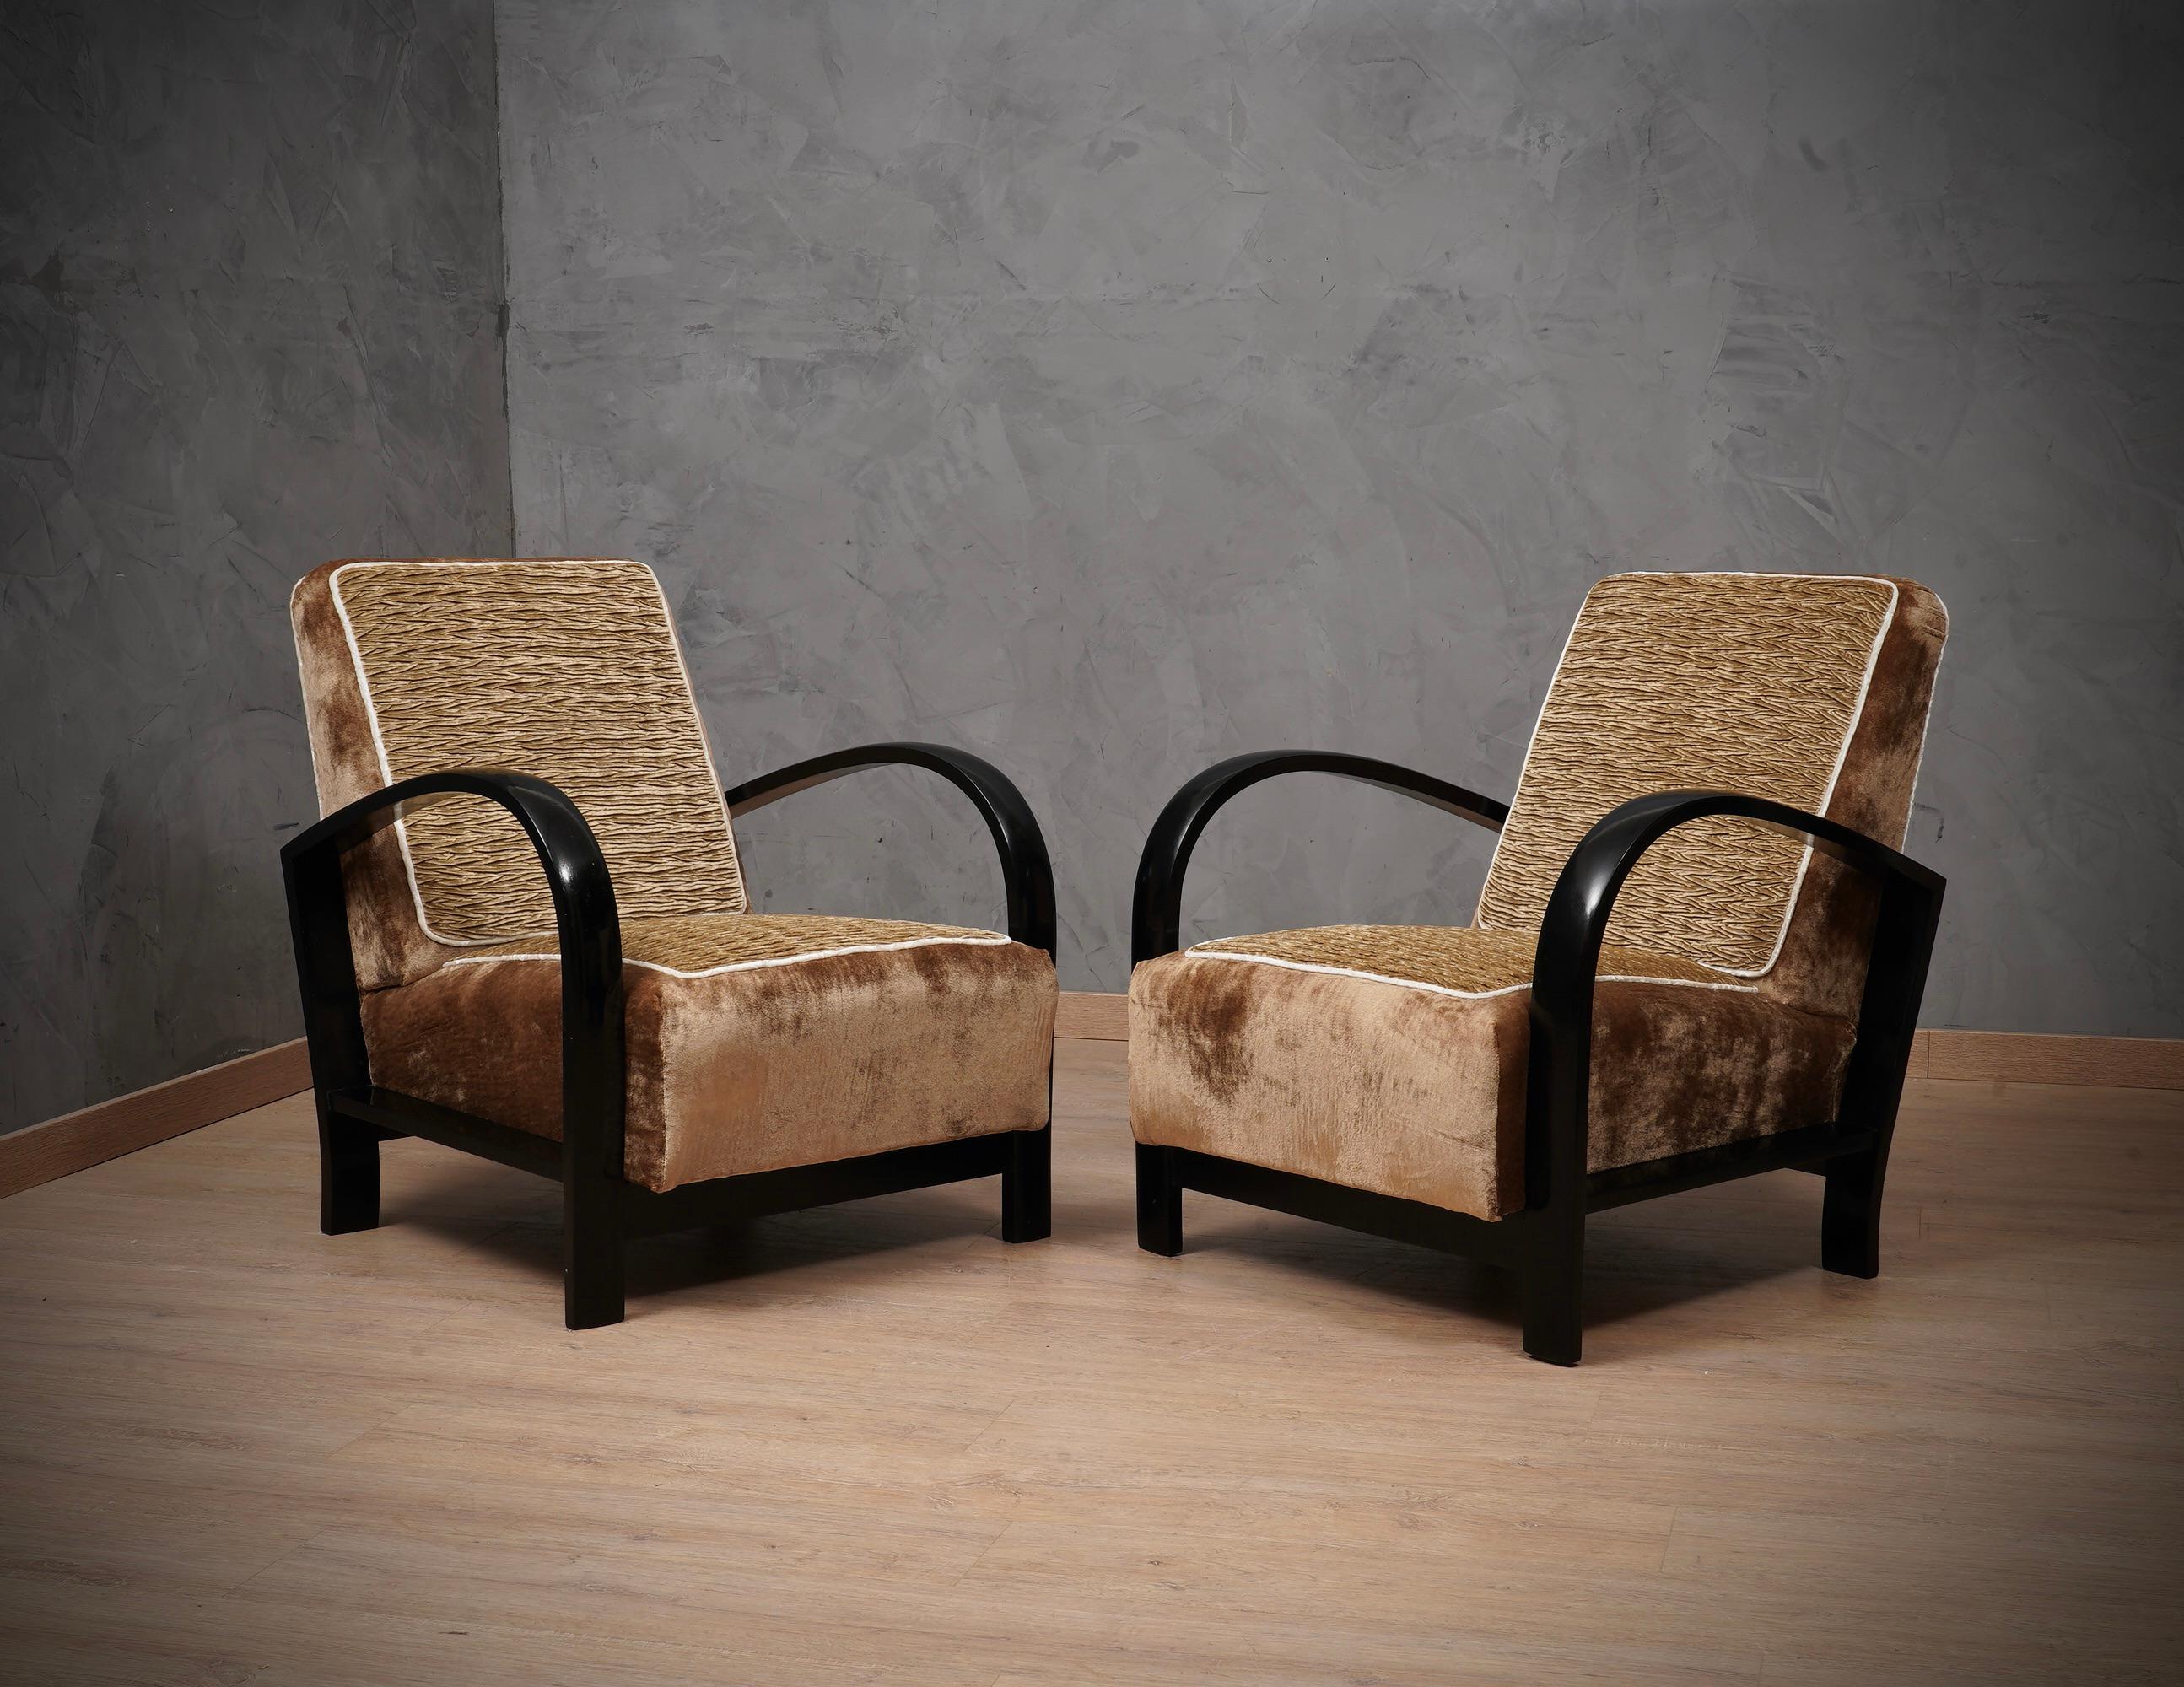 Italian Art Deco armchairs, embellished with a fabric insert from an important Italian silk factory. Classic and linear Italian style.

The wooden frame, armrests and lower part, are completely polished in black shellac; while the seat and backrest,